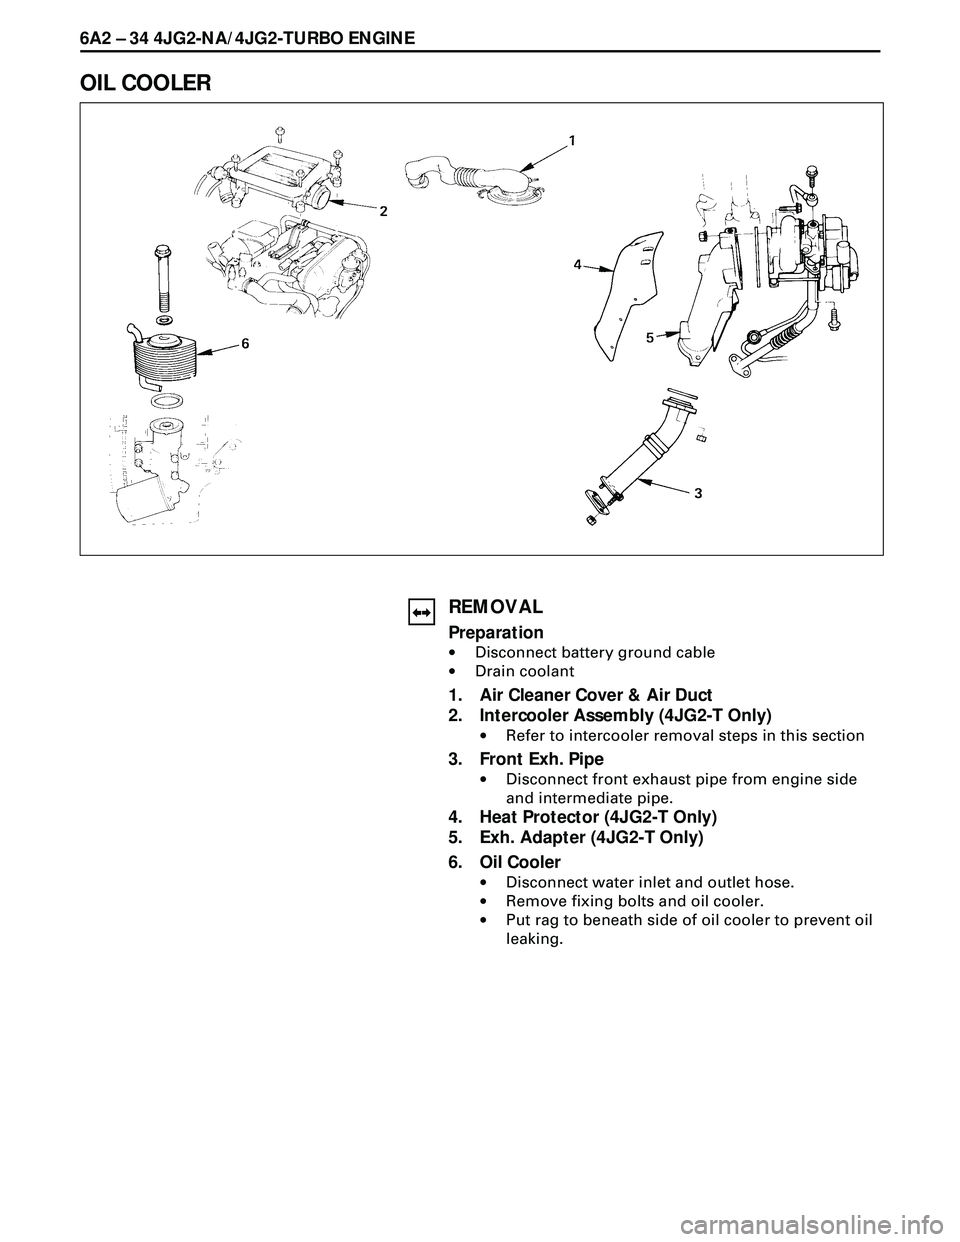 ISUZU TROOPER 1998  Service Owners Guide 6A2 Ð 34 4JG2-NA/4JG2-TURBO ENGINE
OIL COOLER
REMOVAL
Preparation
·Disconnect battery ground cable
·Drain coolant
1. Air Cleaner Cover & Air Duct
2. Intercooler Assembly (4JG2-T Only)
·Refer to in